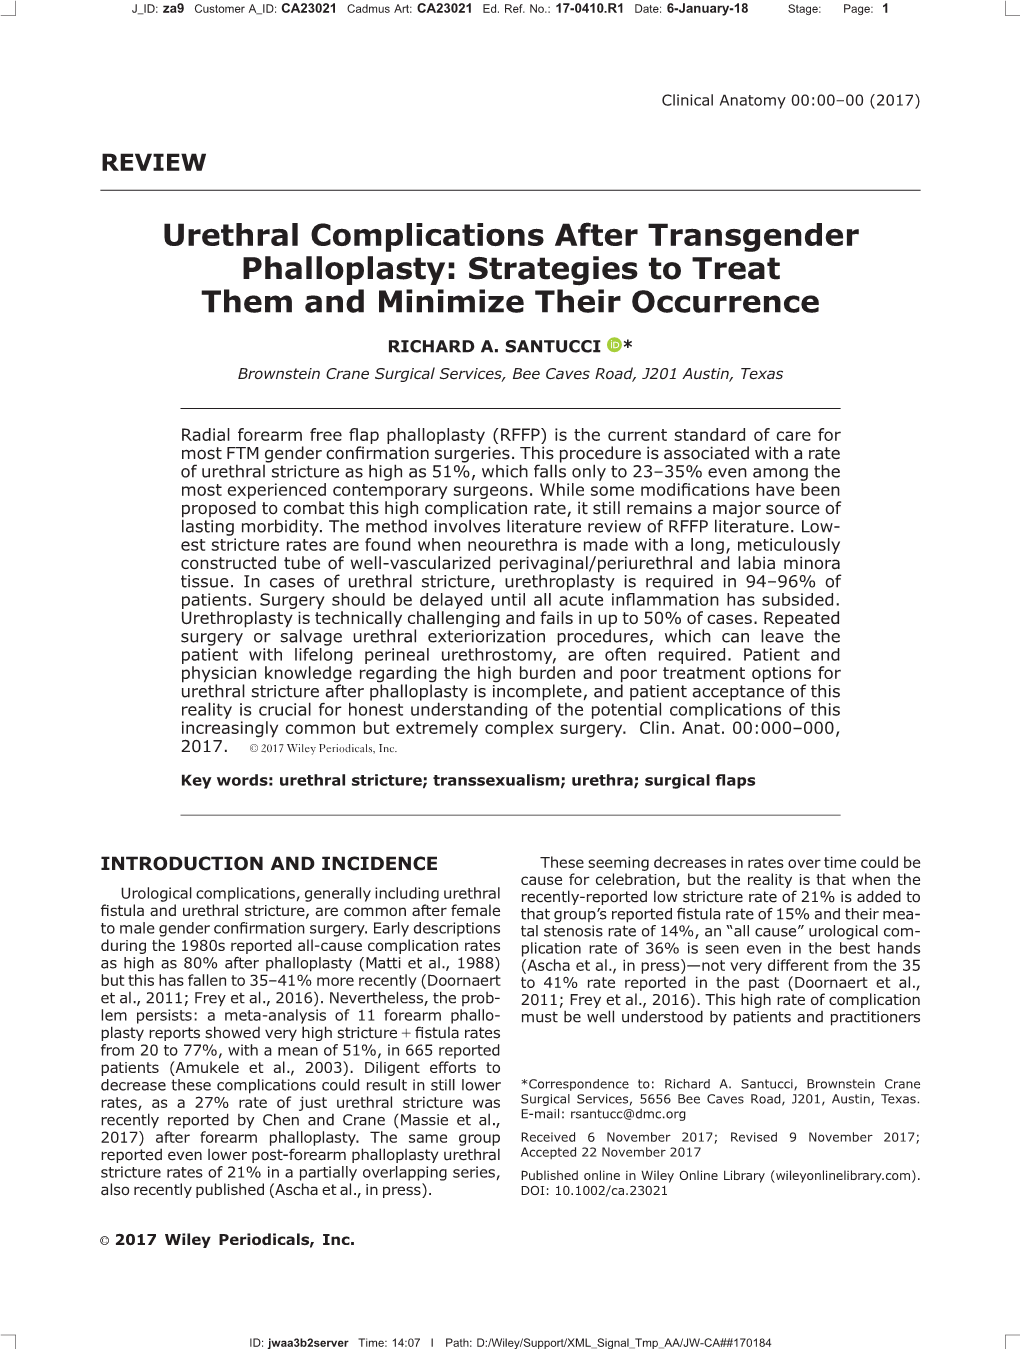 Urethral Complications After Transgender Phalloplasty: Strategies to Treat Them and Minimize Their Occurrence